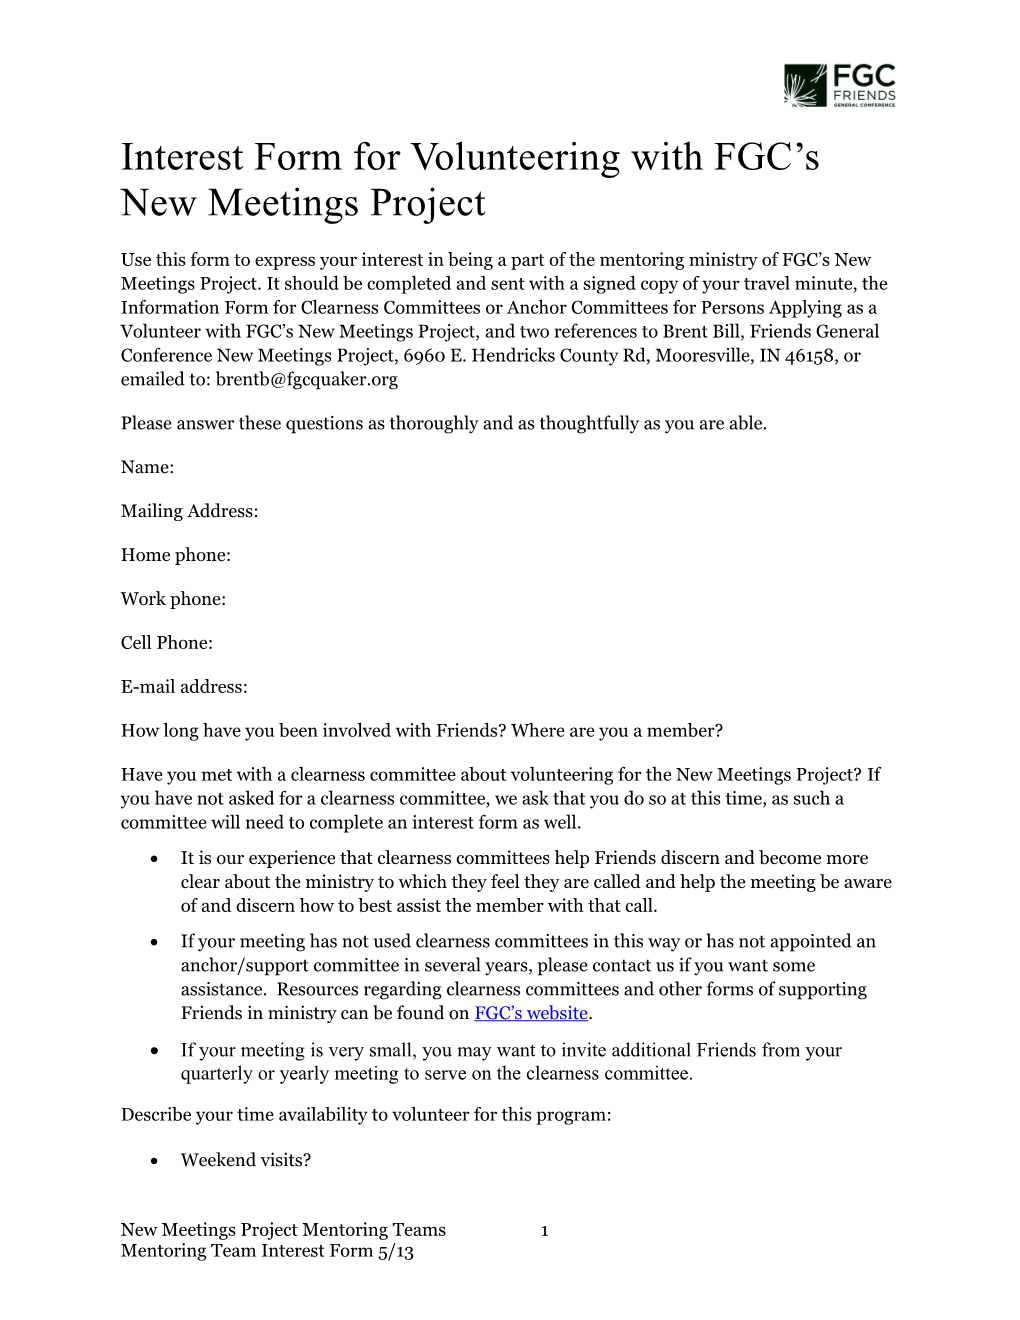 Interest Form for Volunteering with FGC S New Meetings Project